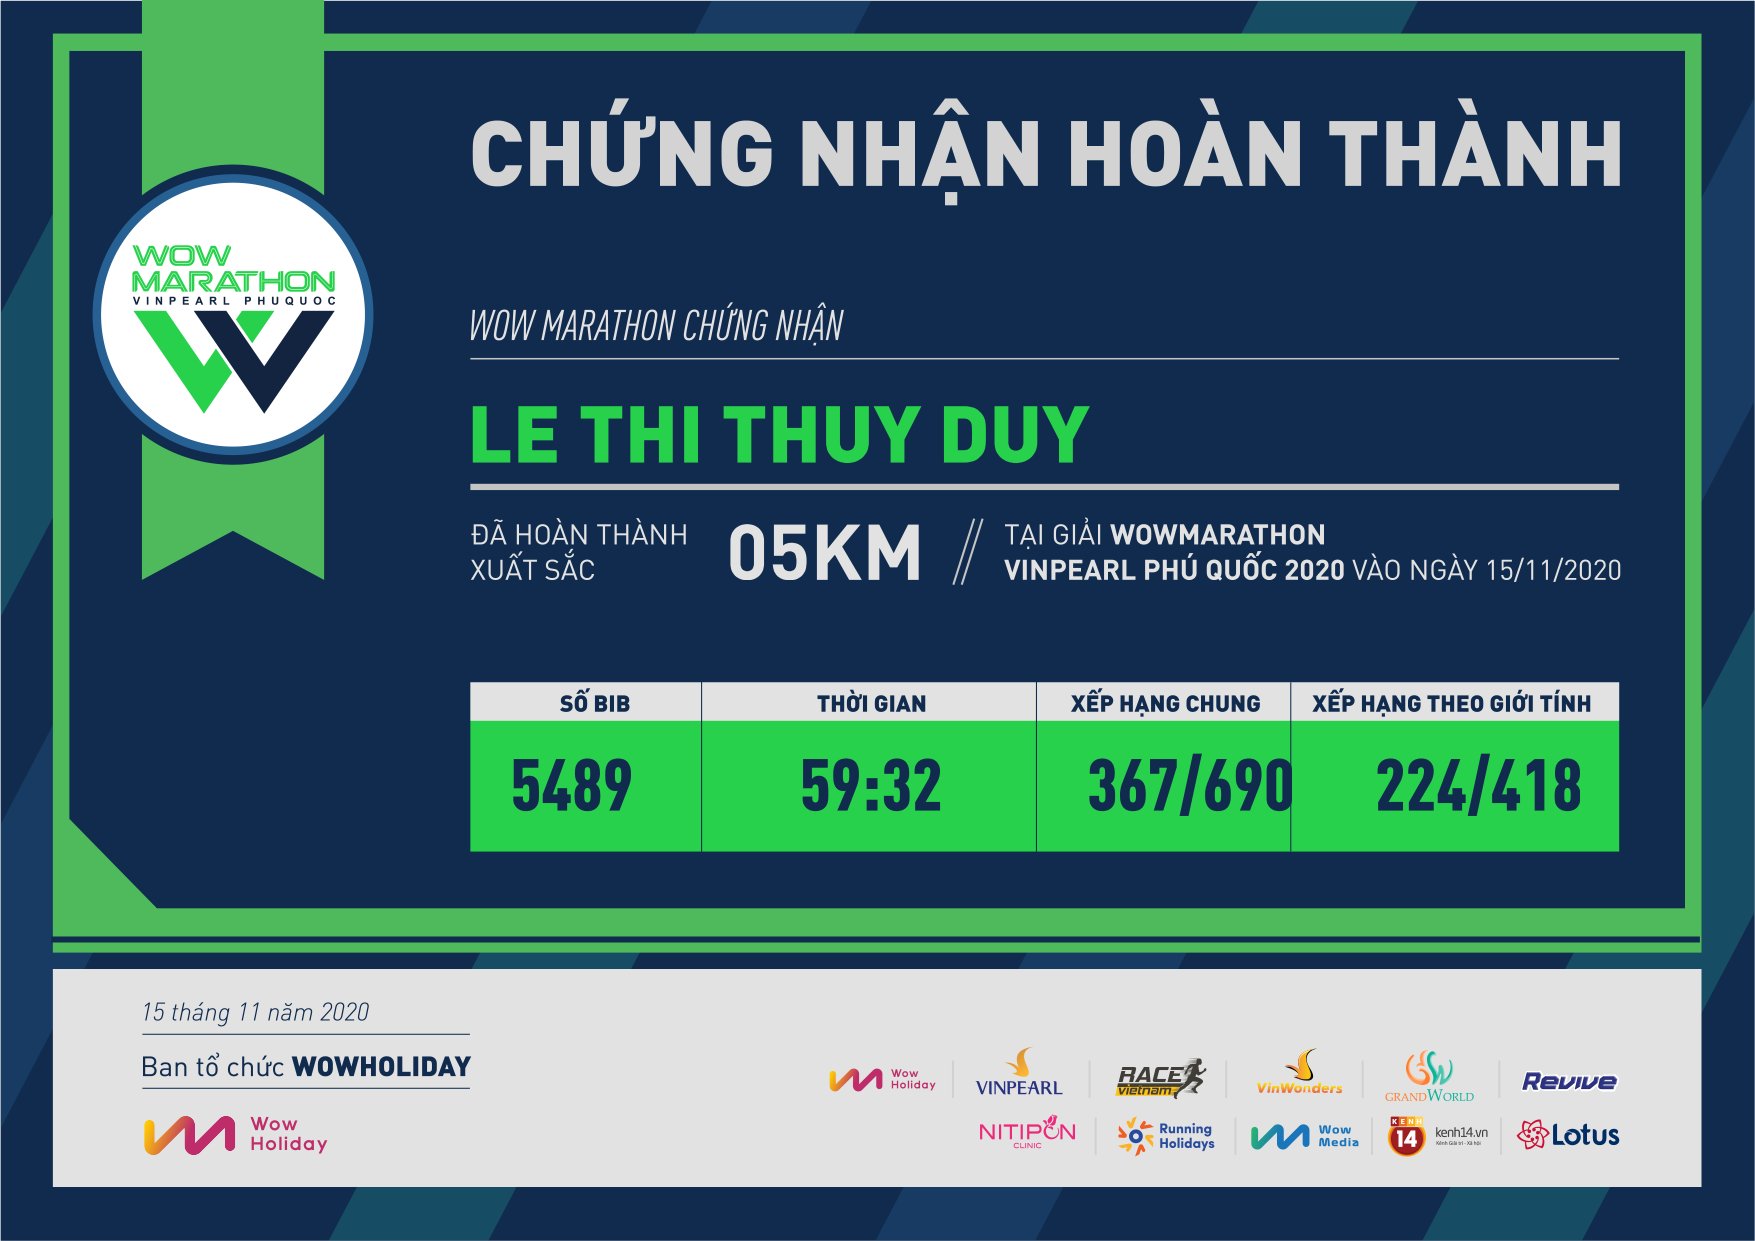 5489 - le thi thuy duy